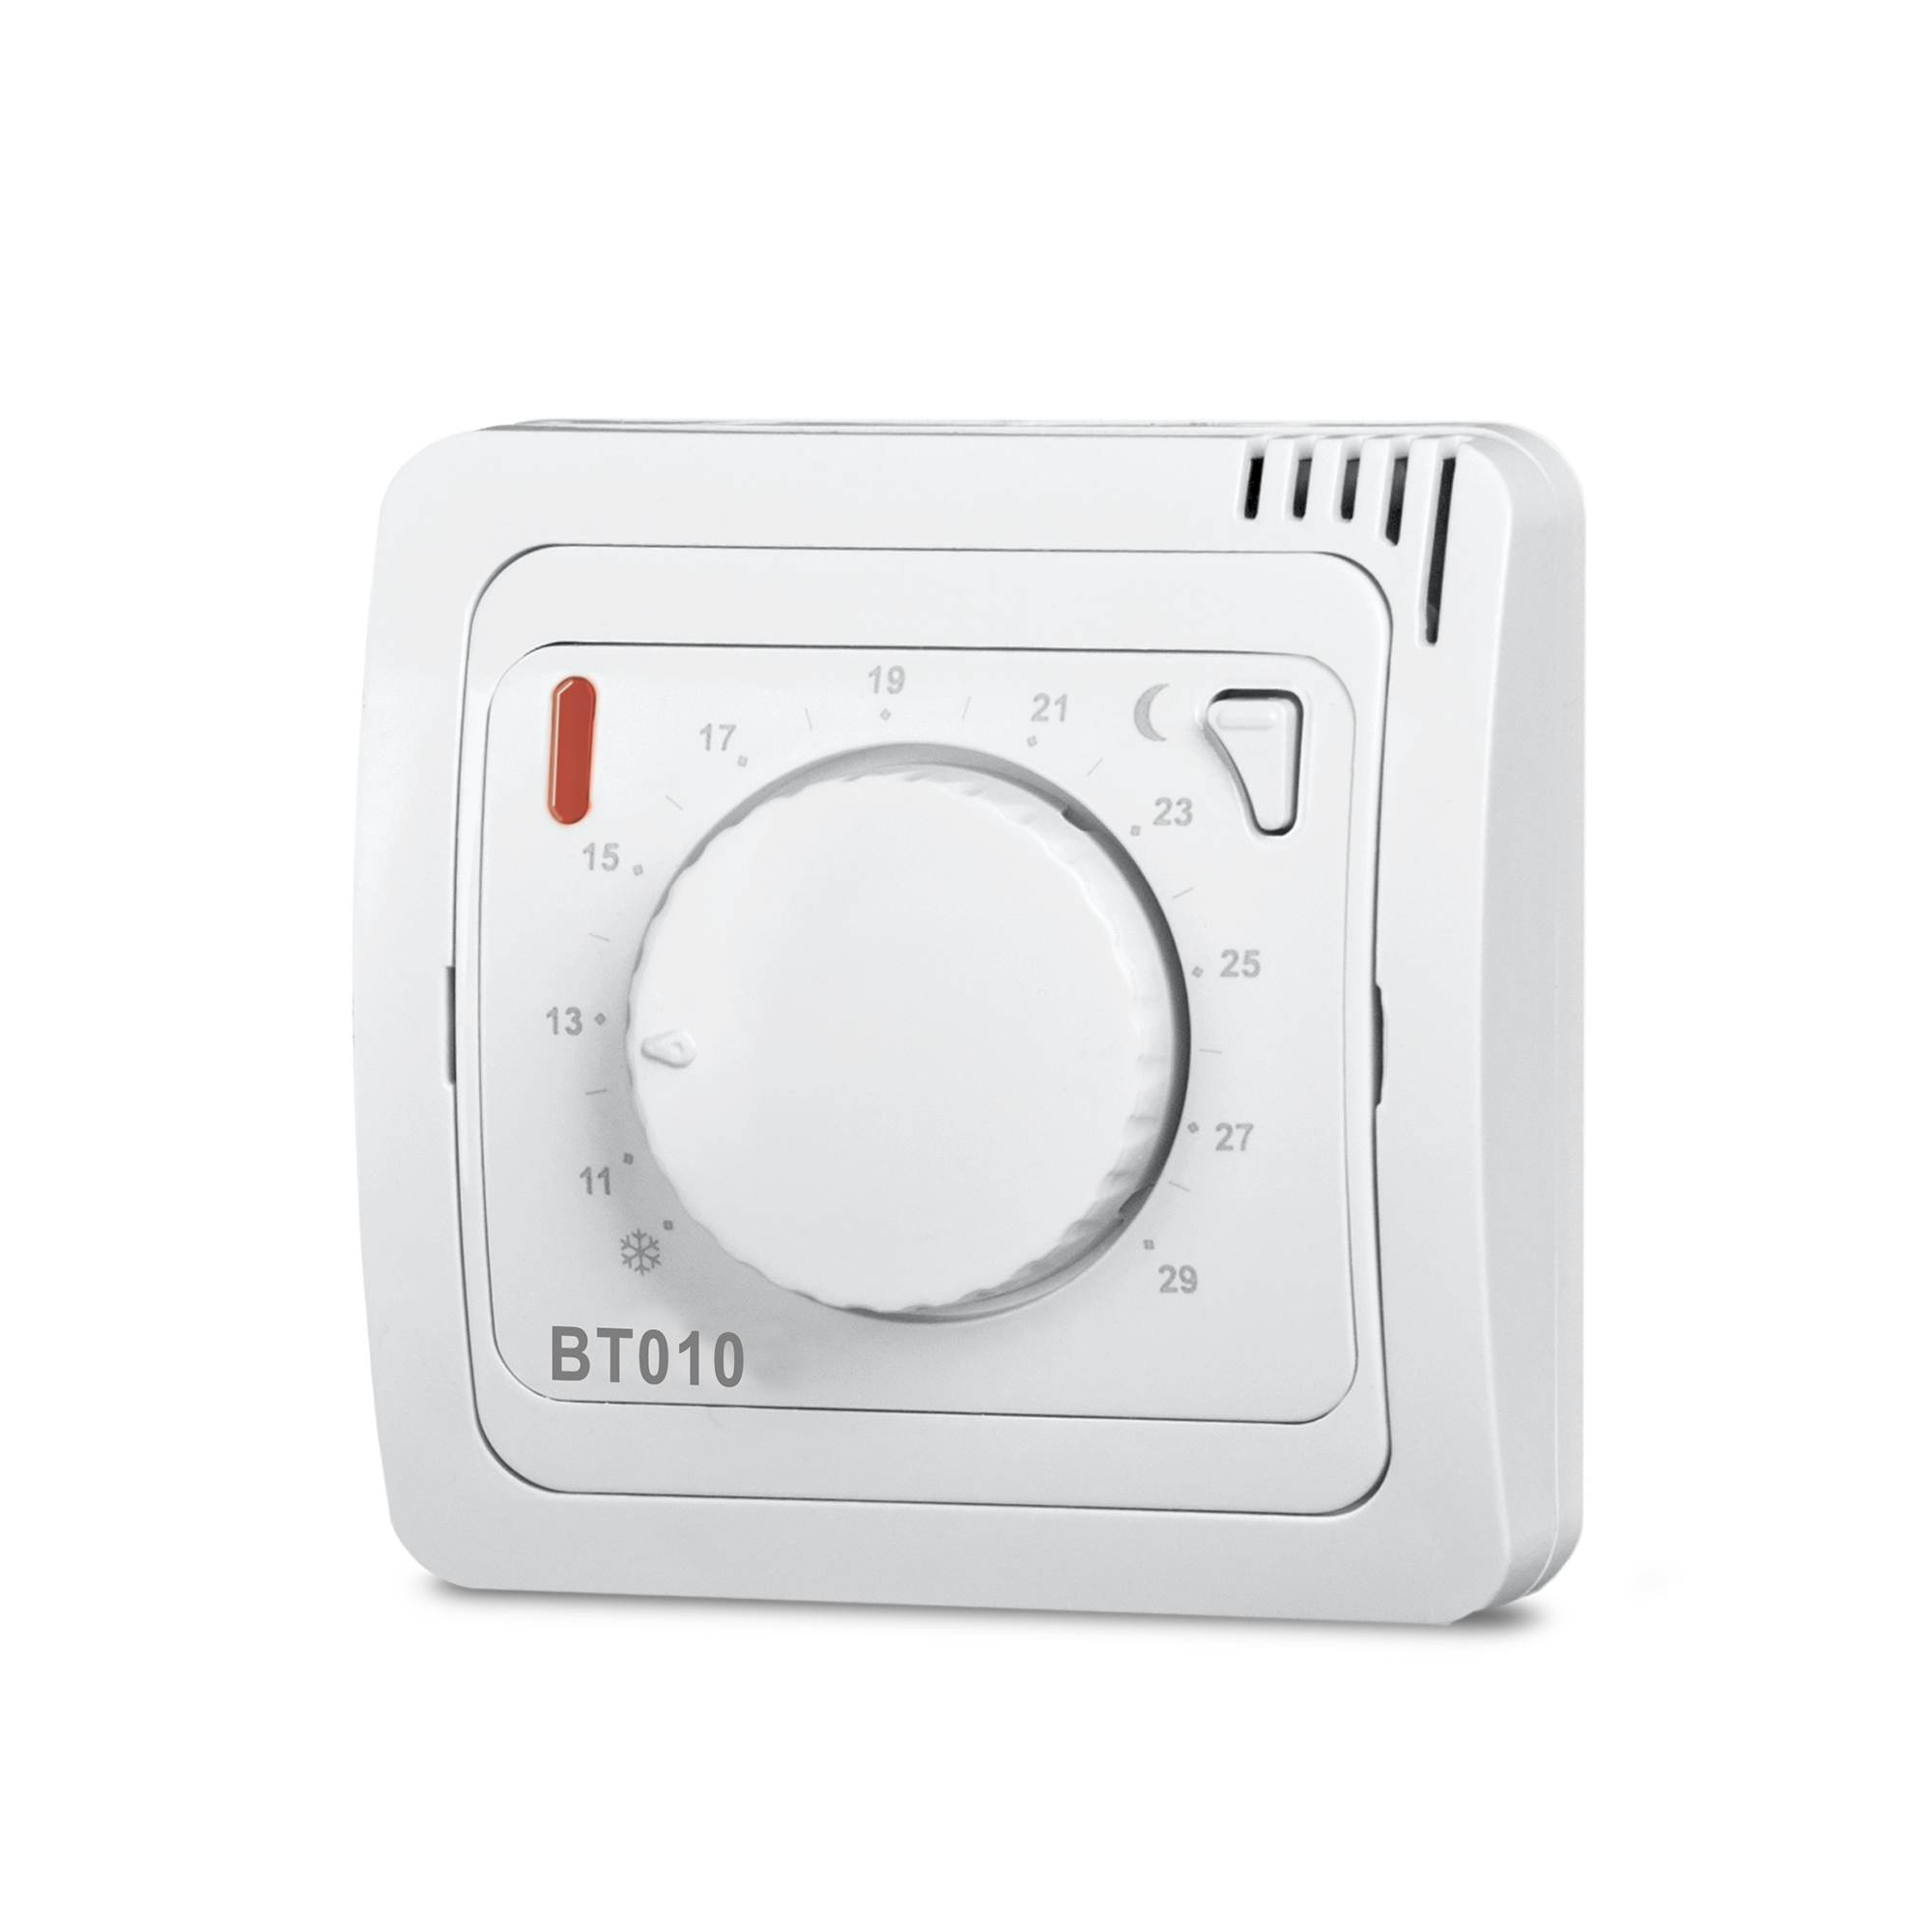 Funk-Raumthermostat 'BT010' + product picture